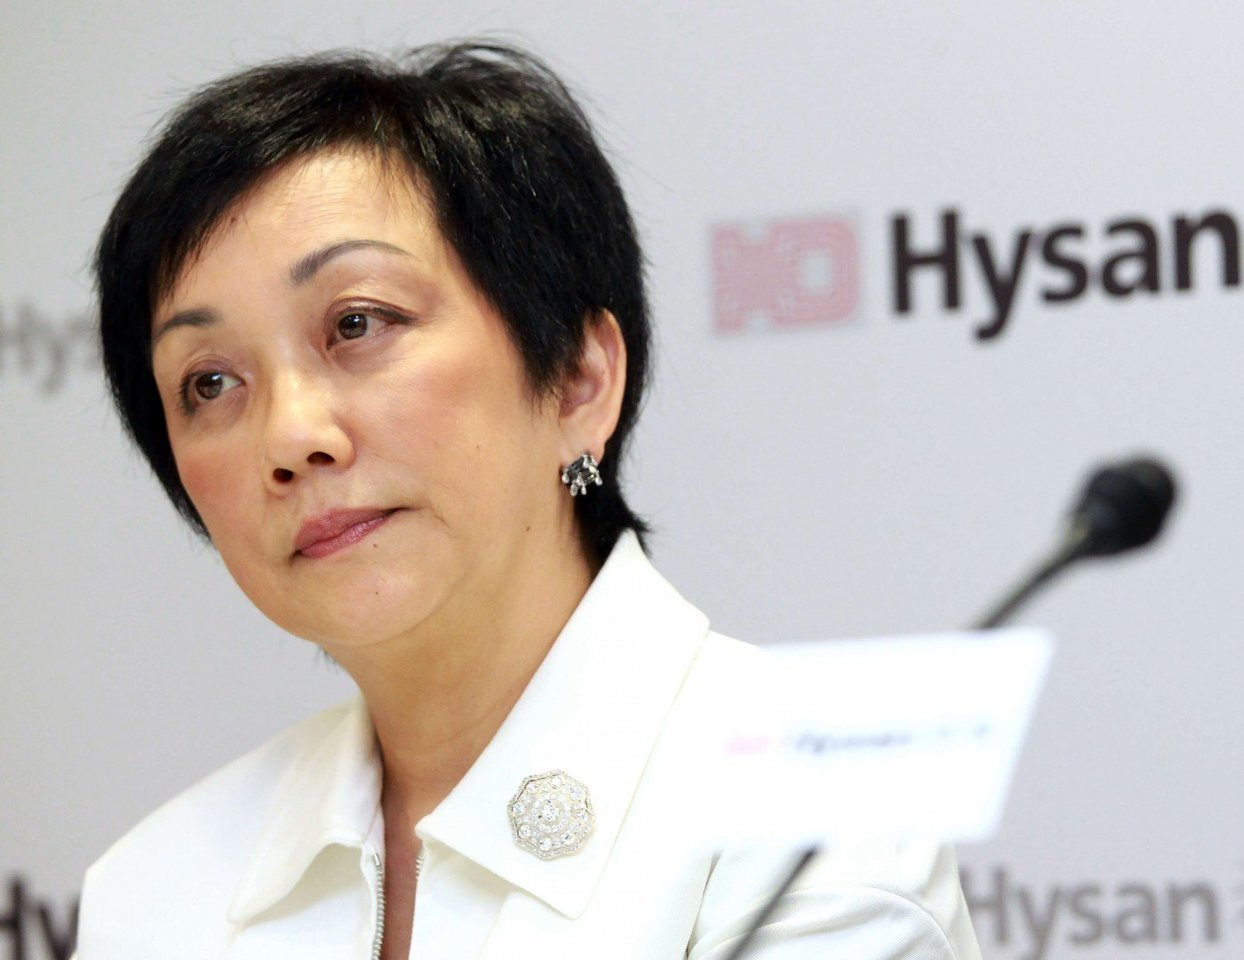 Hang Seng Bank set to appoint first woman as its chairman